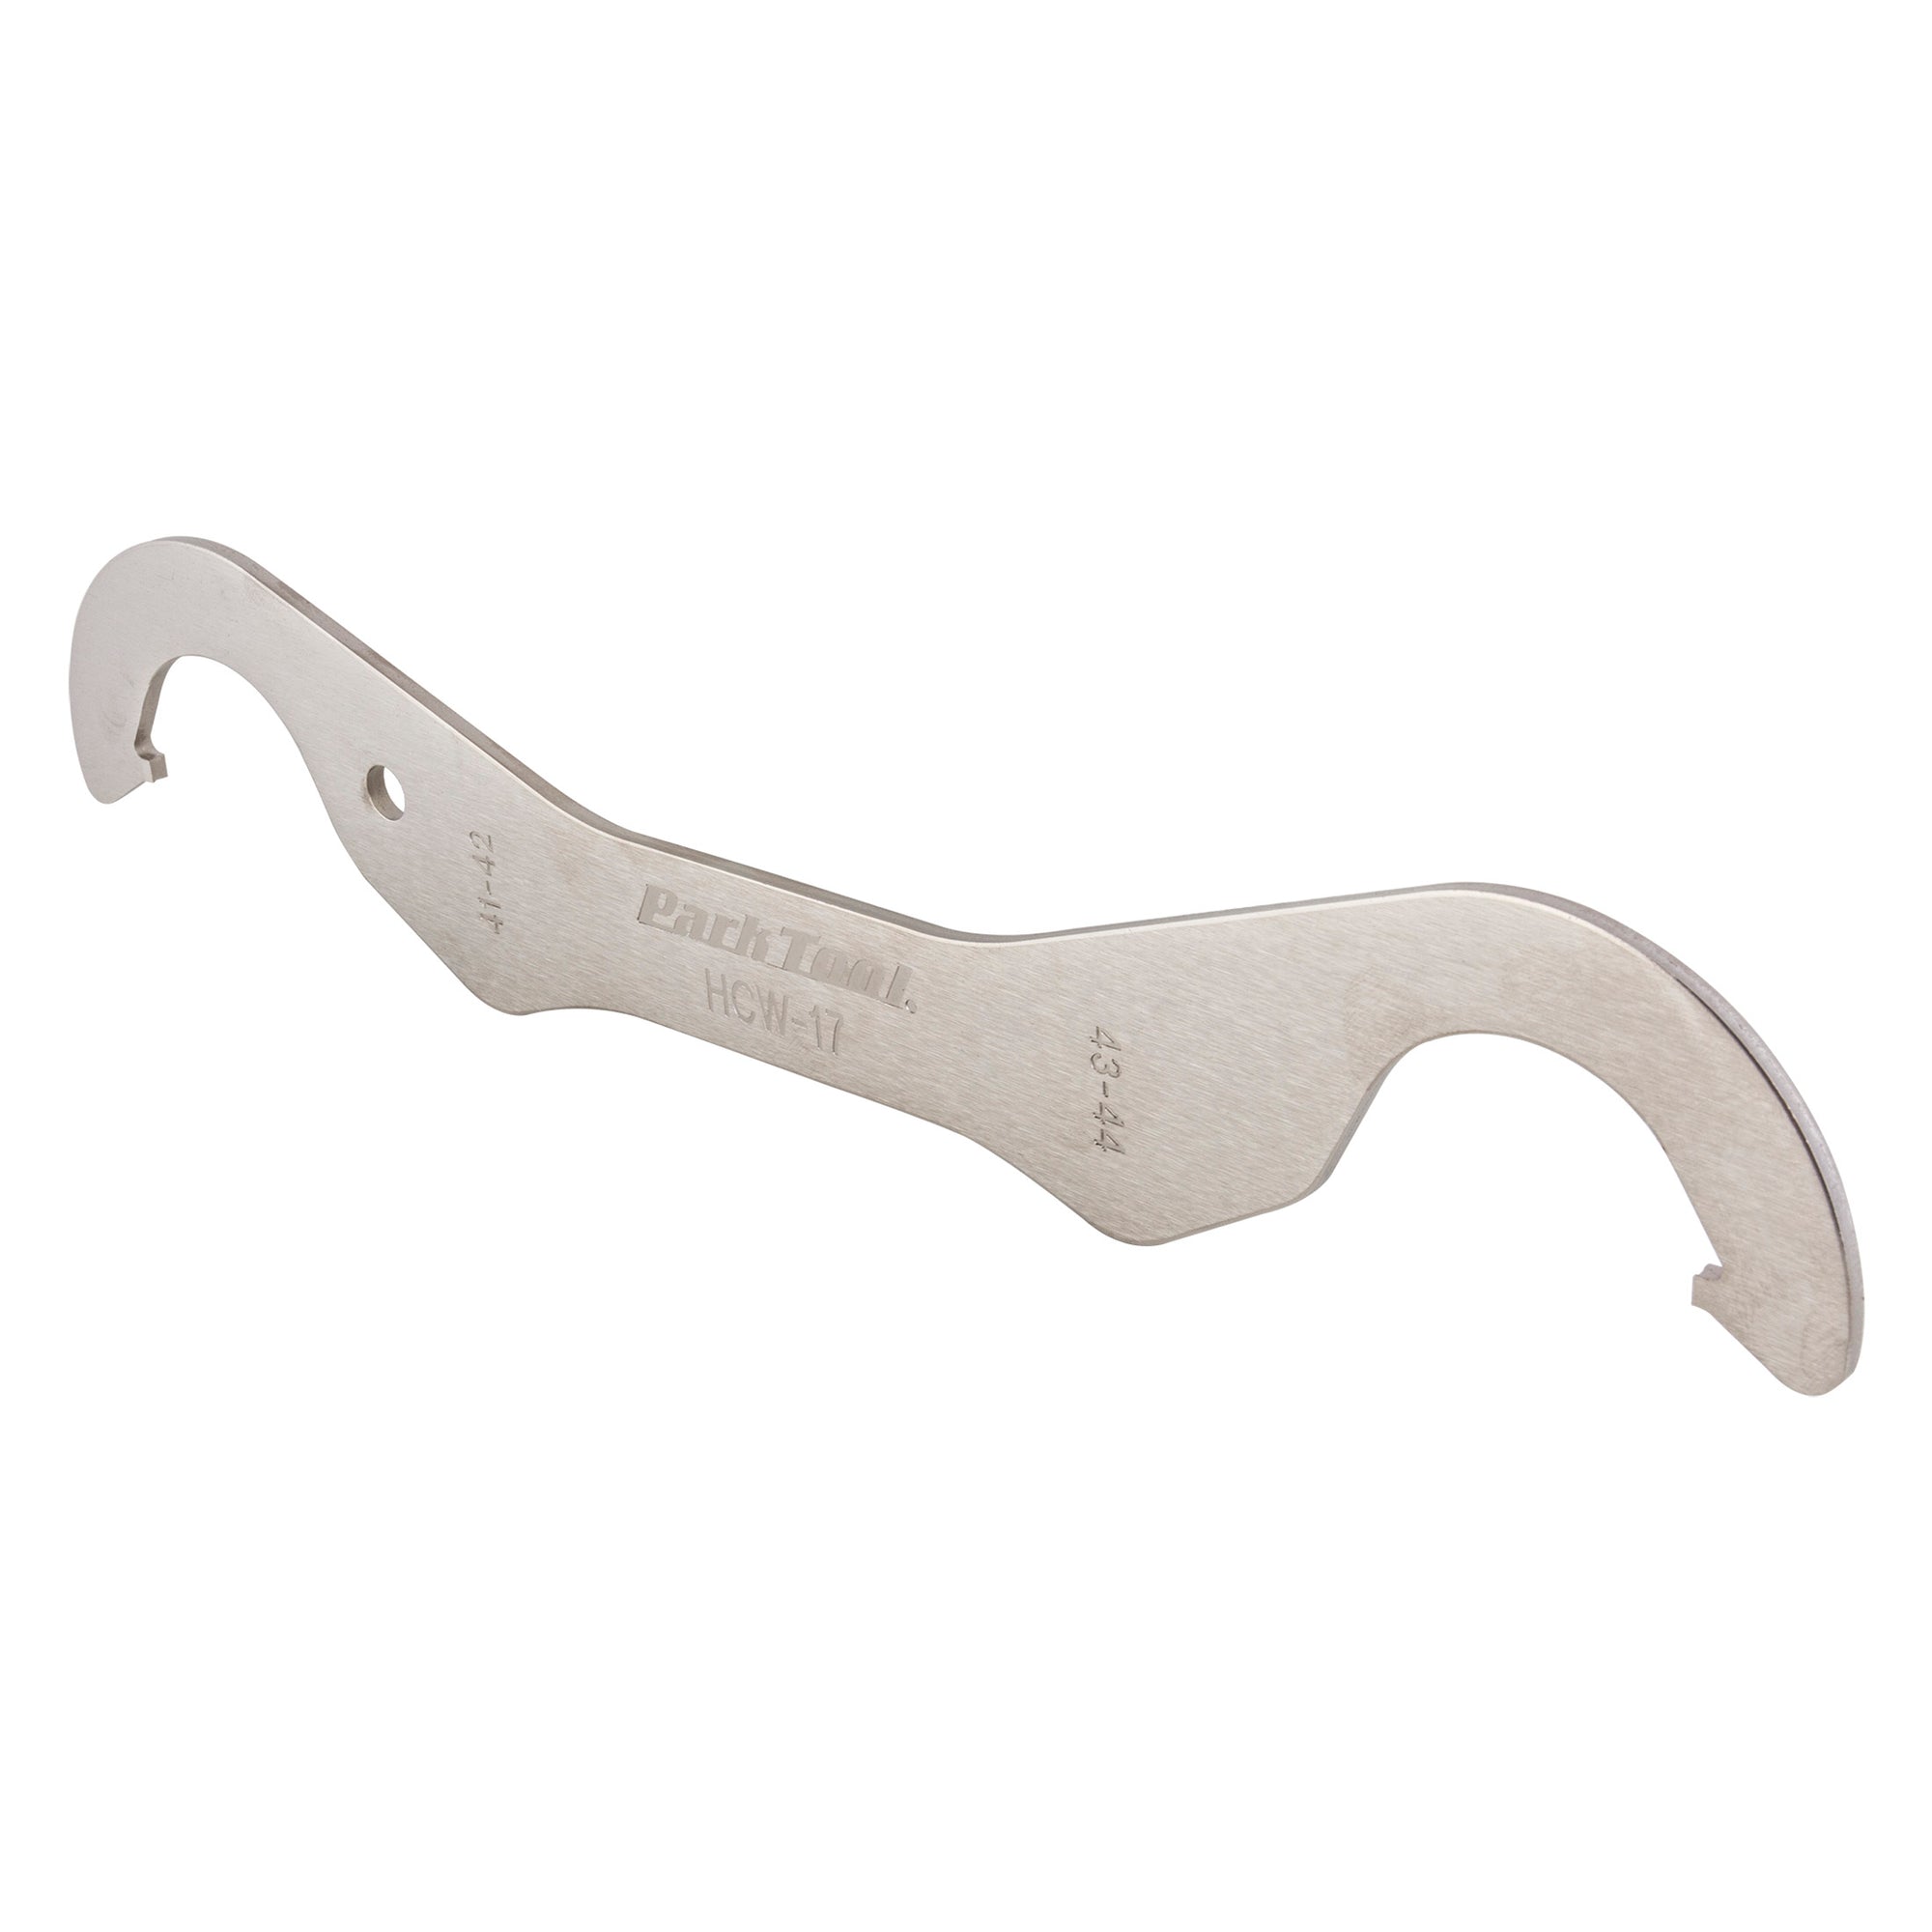 Park HCW-17 Fixed-Gear Lockring Wrench Tool